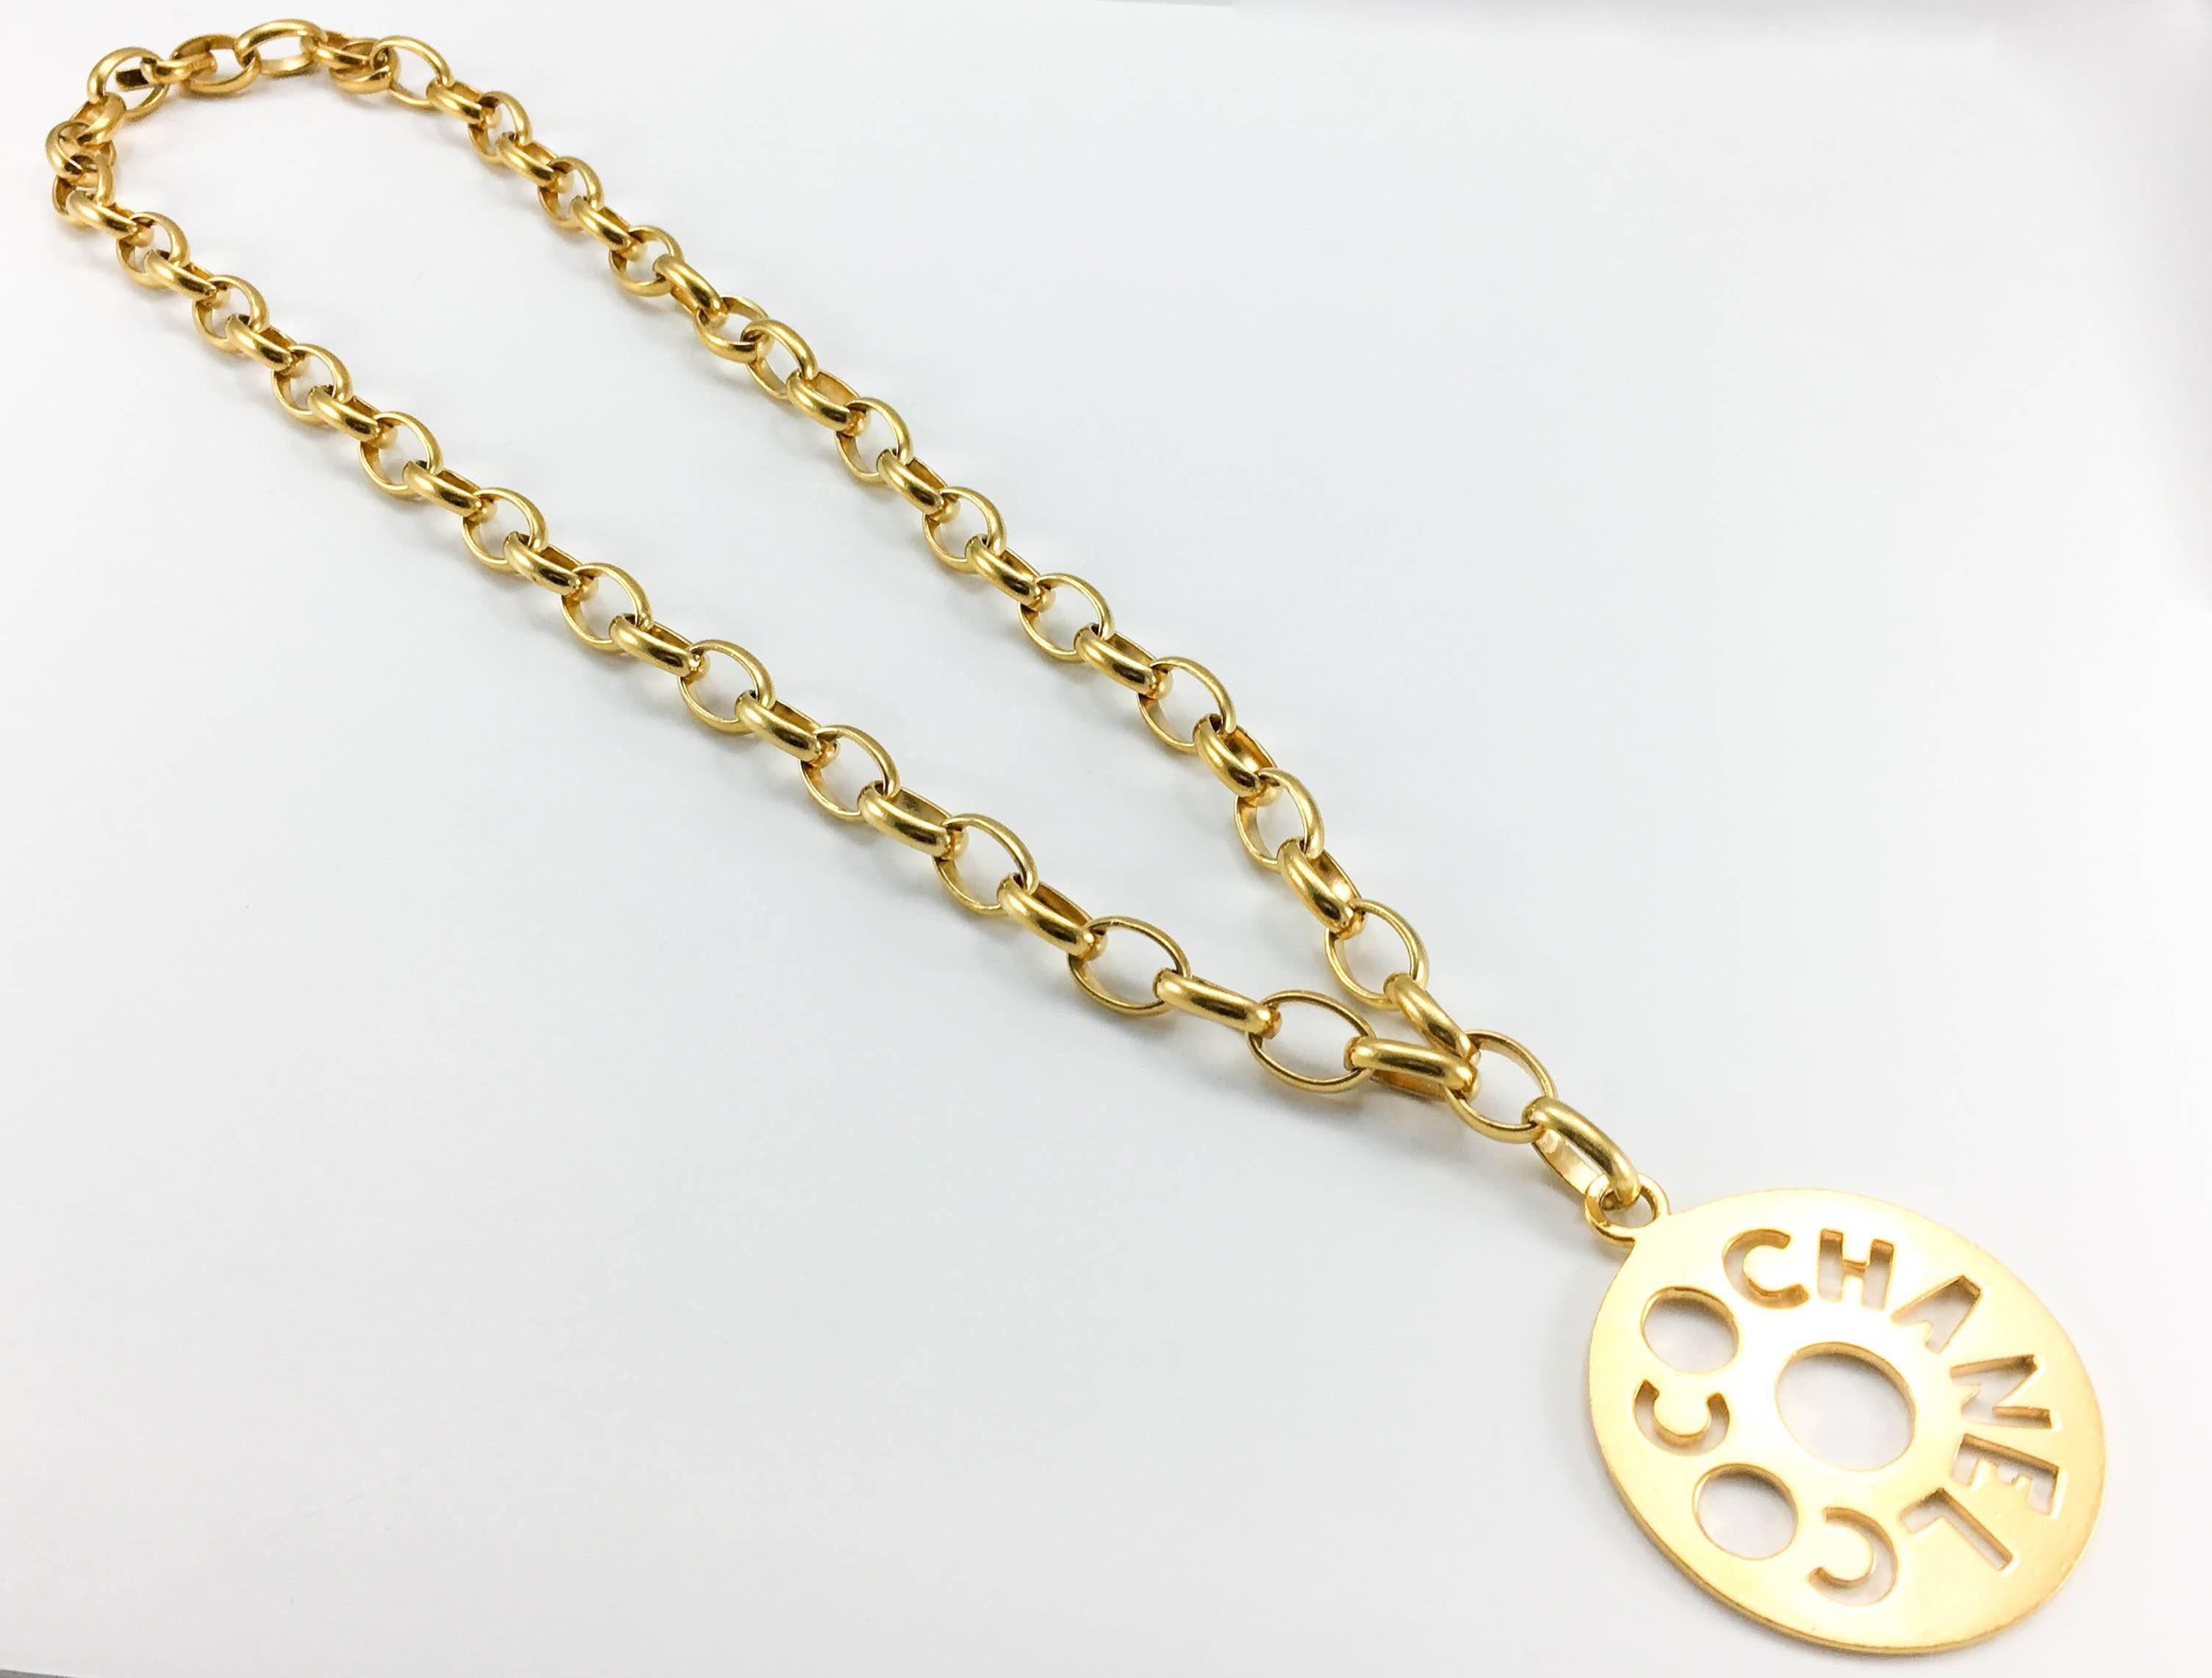 Chanel Chunky Gold-Tone 'Coco Chanel' Disk Pendant Chain Necklace - 1970's 2